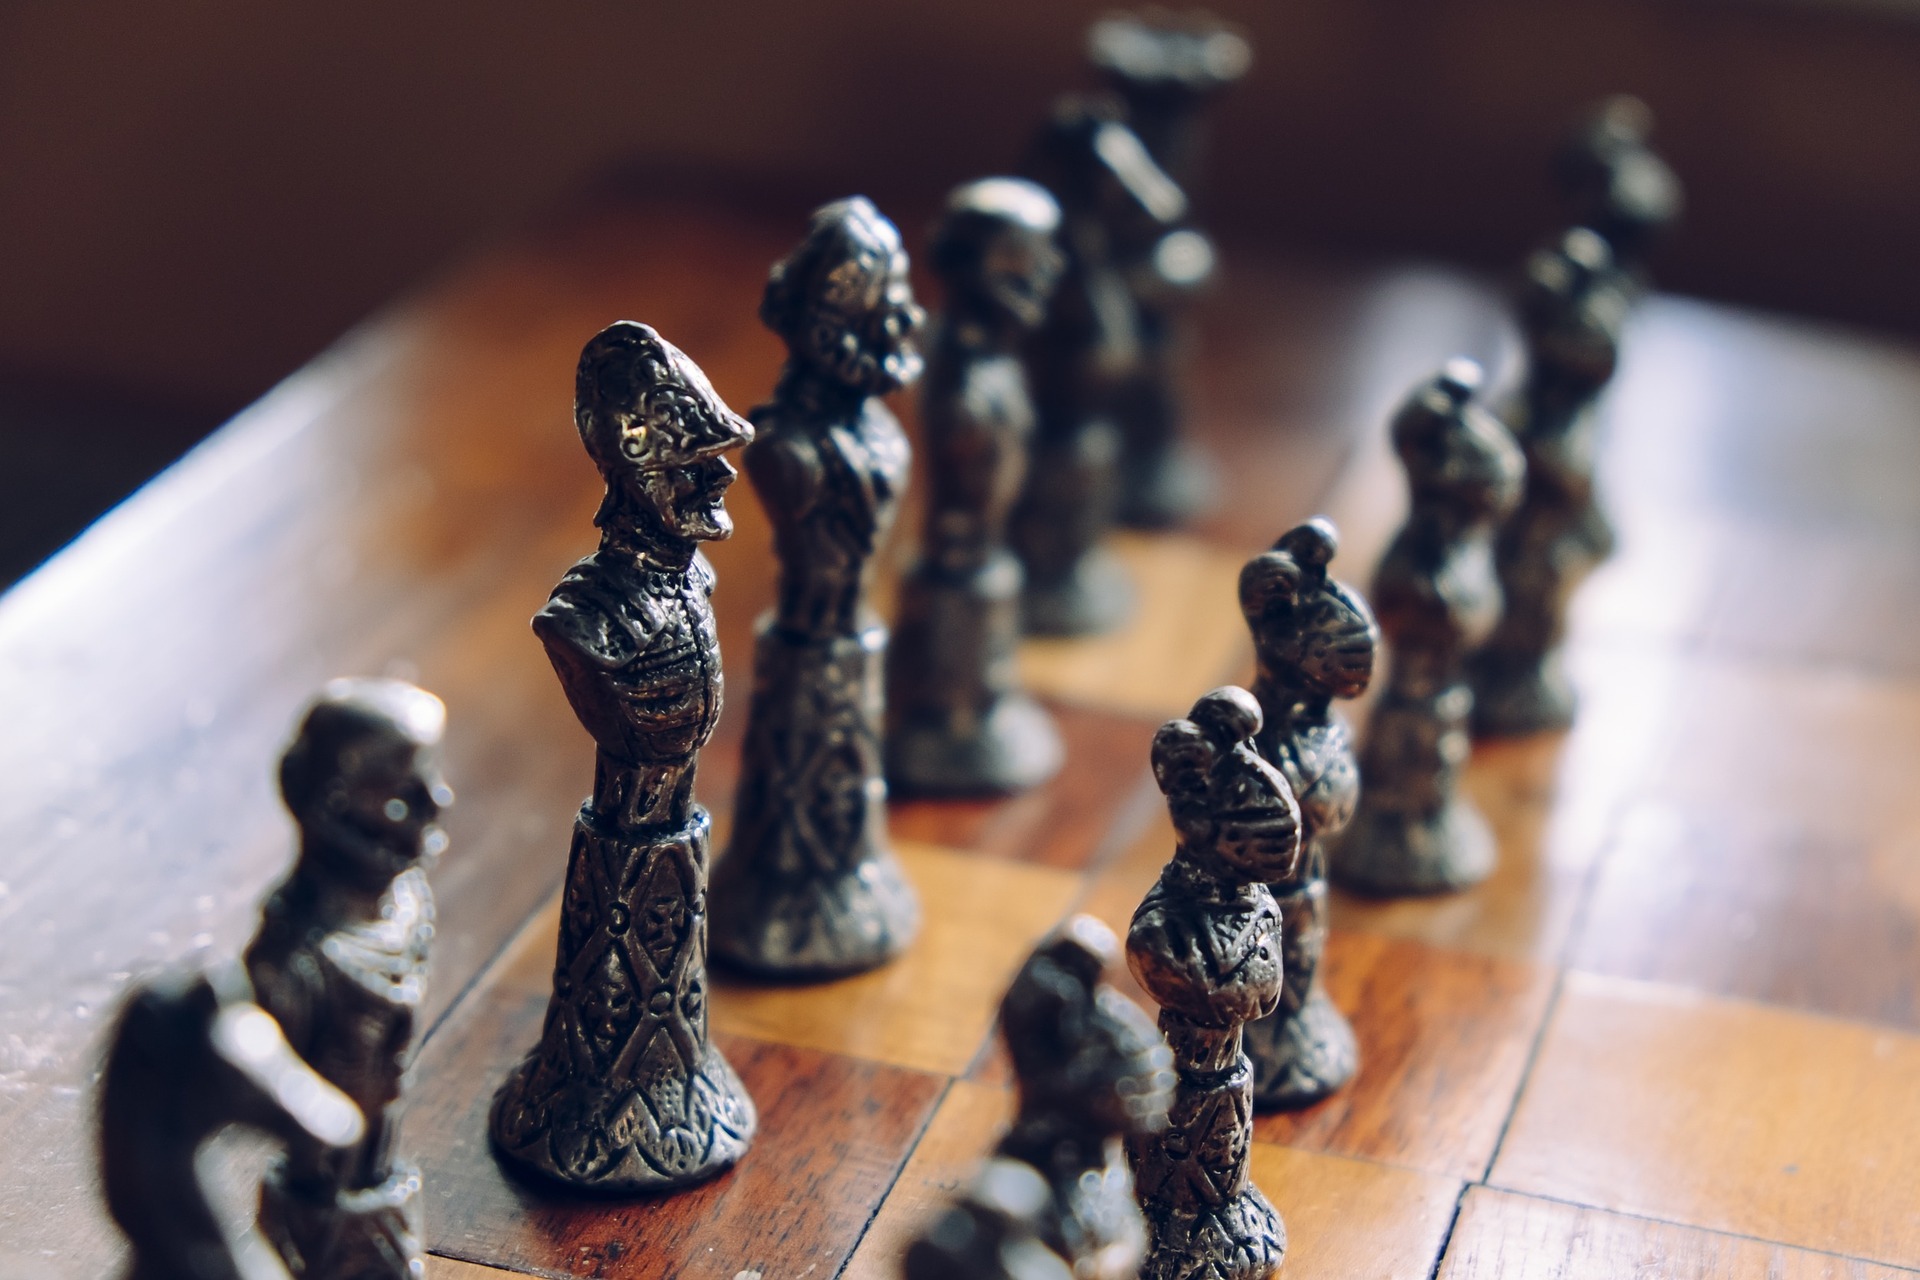 chess pieces set up on board